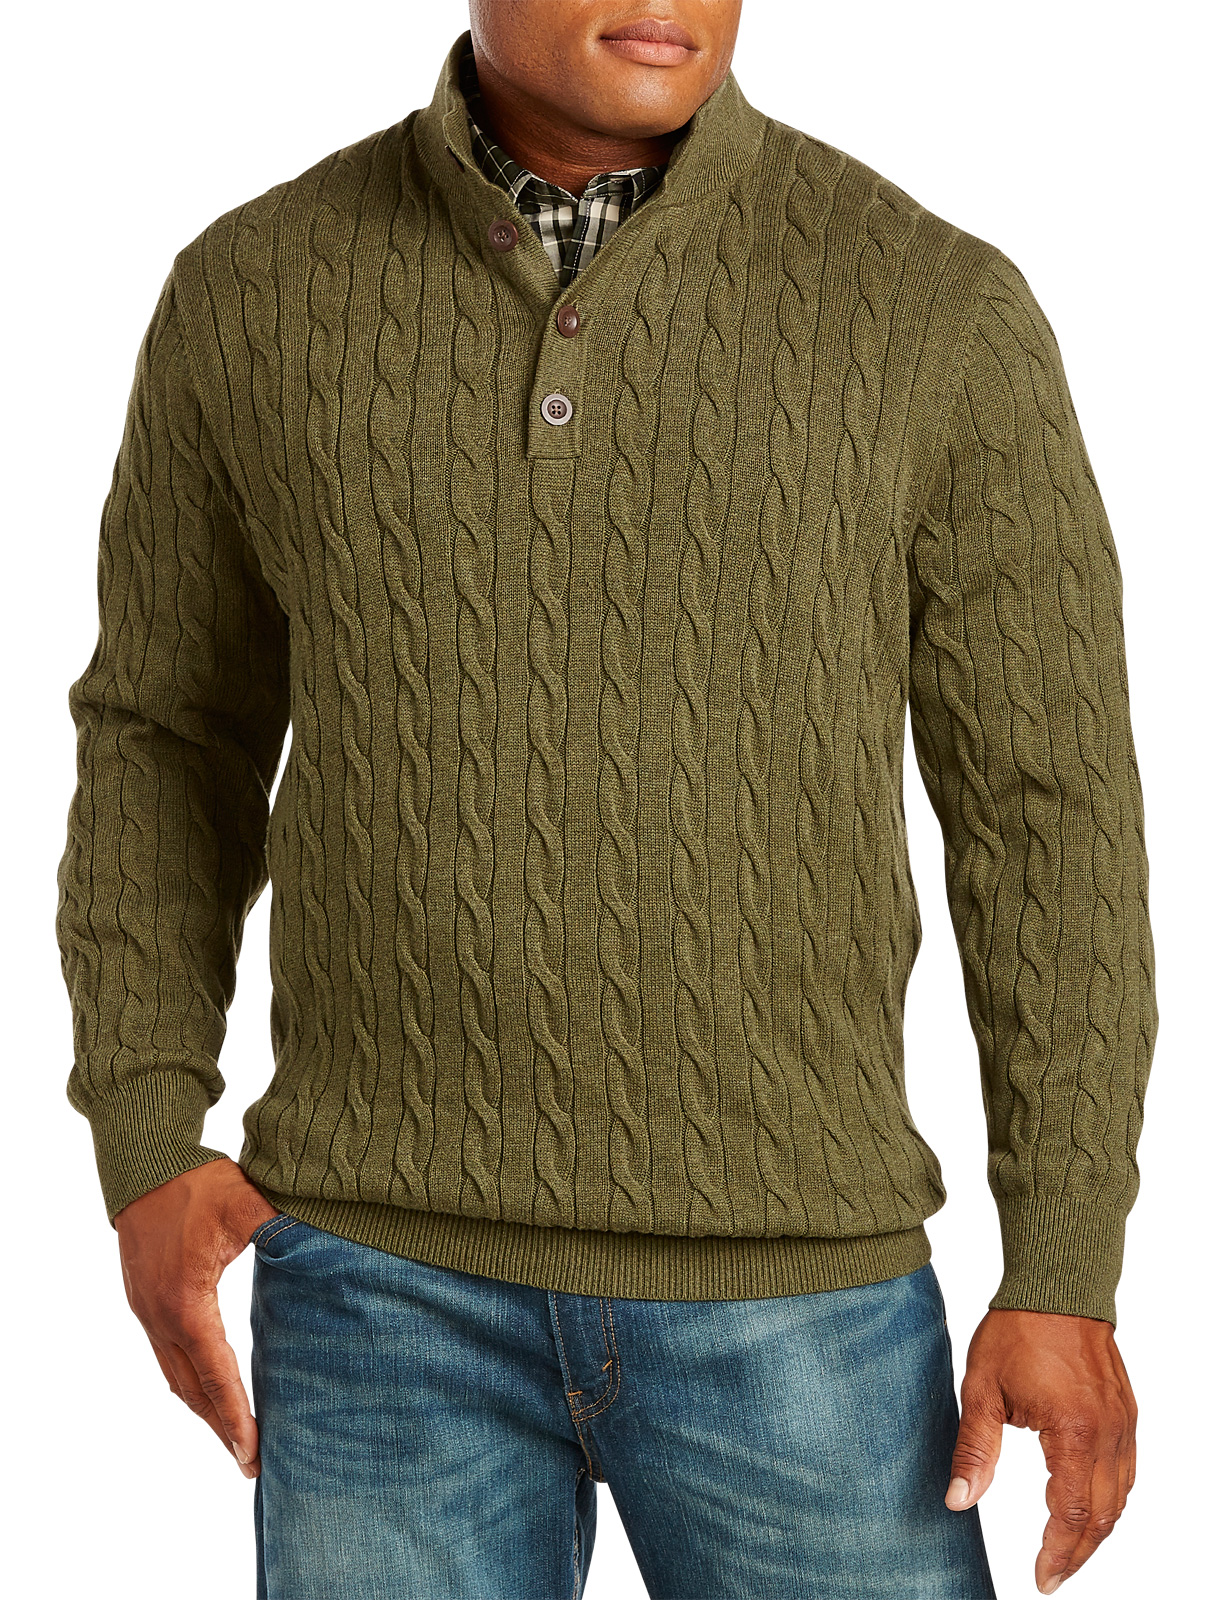 Oak Hill Men's Big and Tall Button-Mock Neck Cableknit Sweater